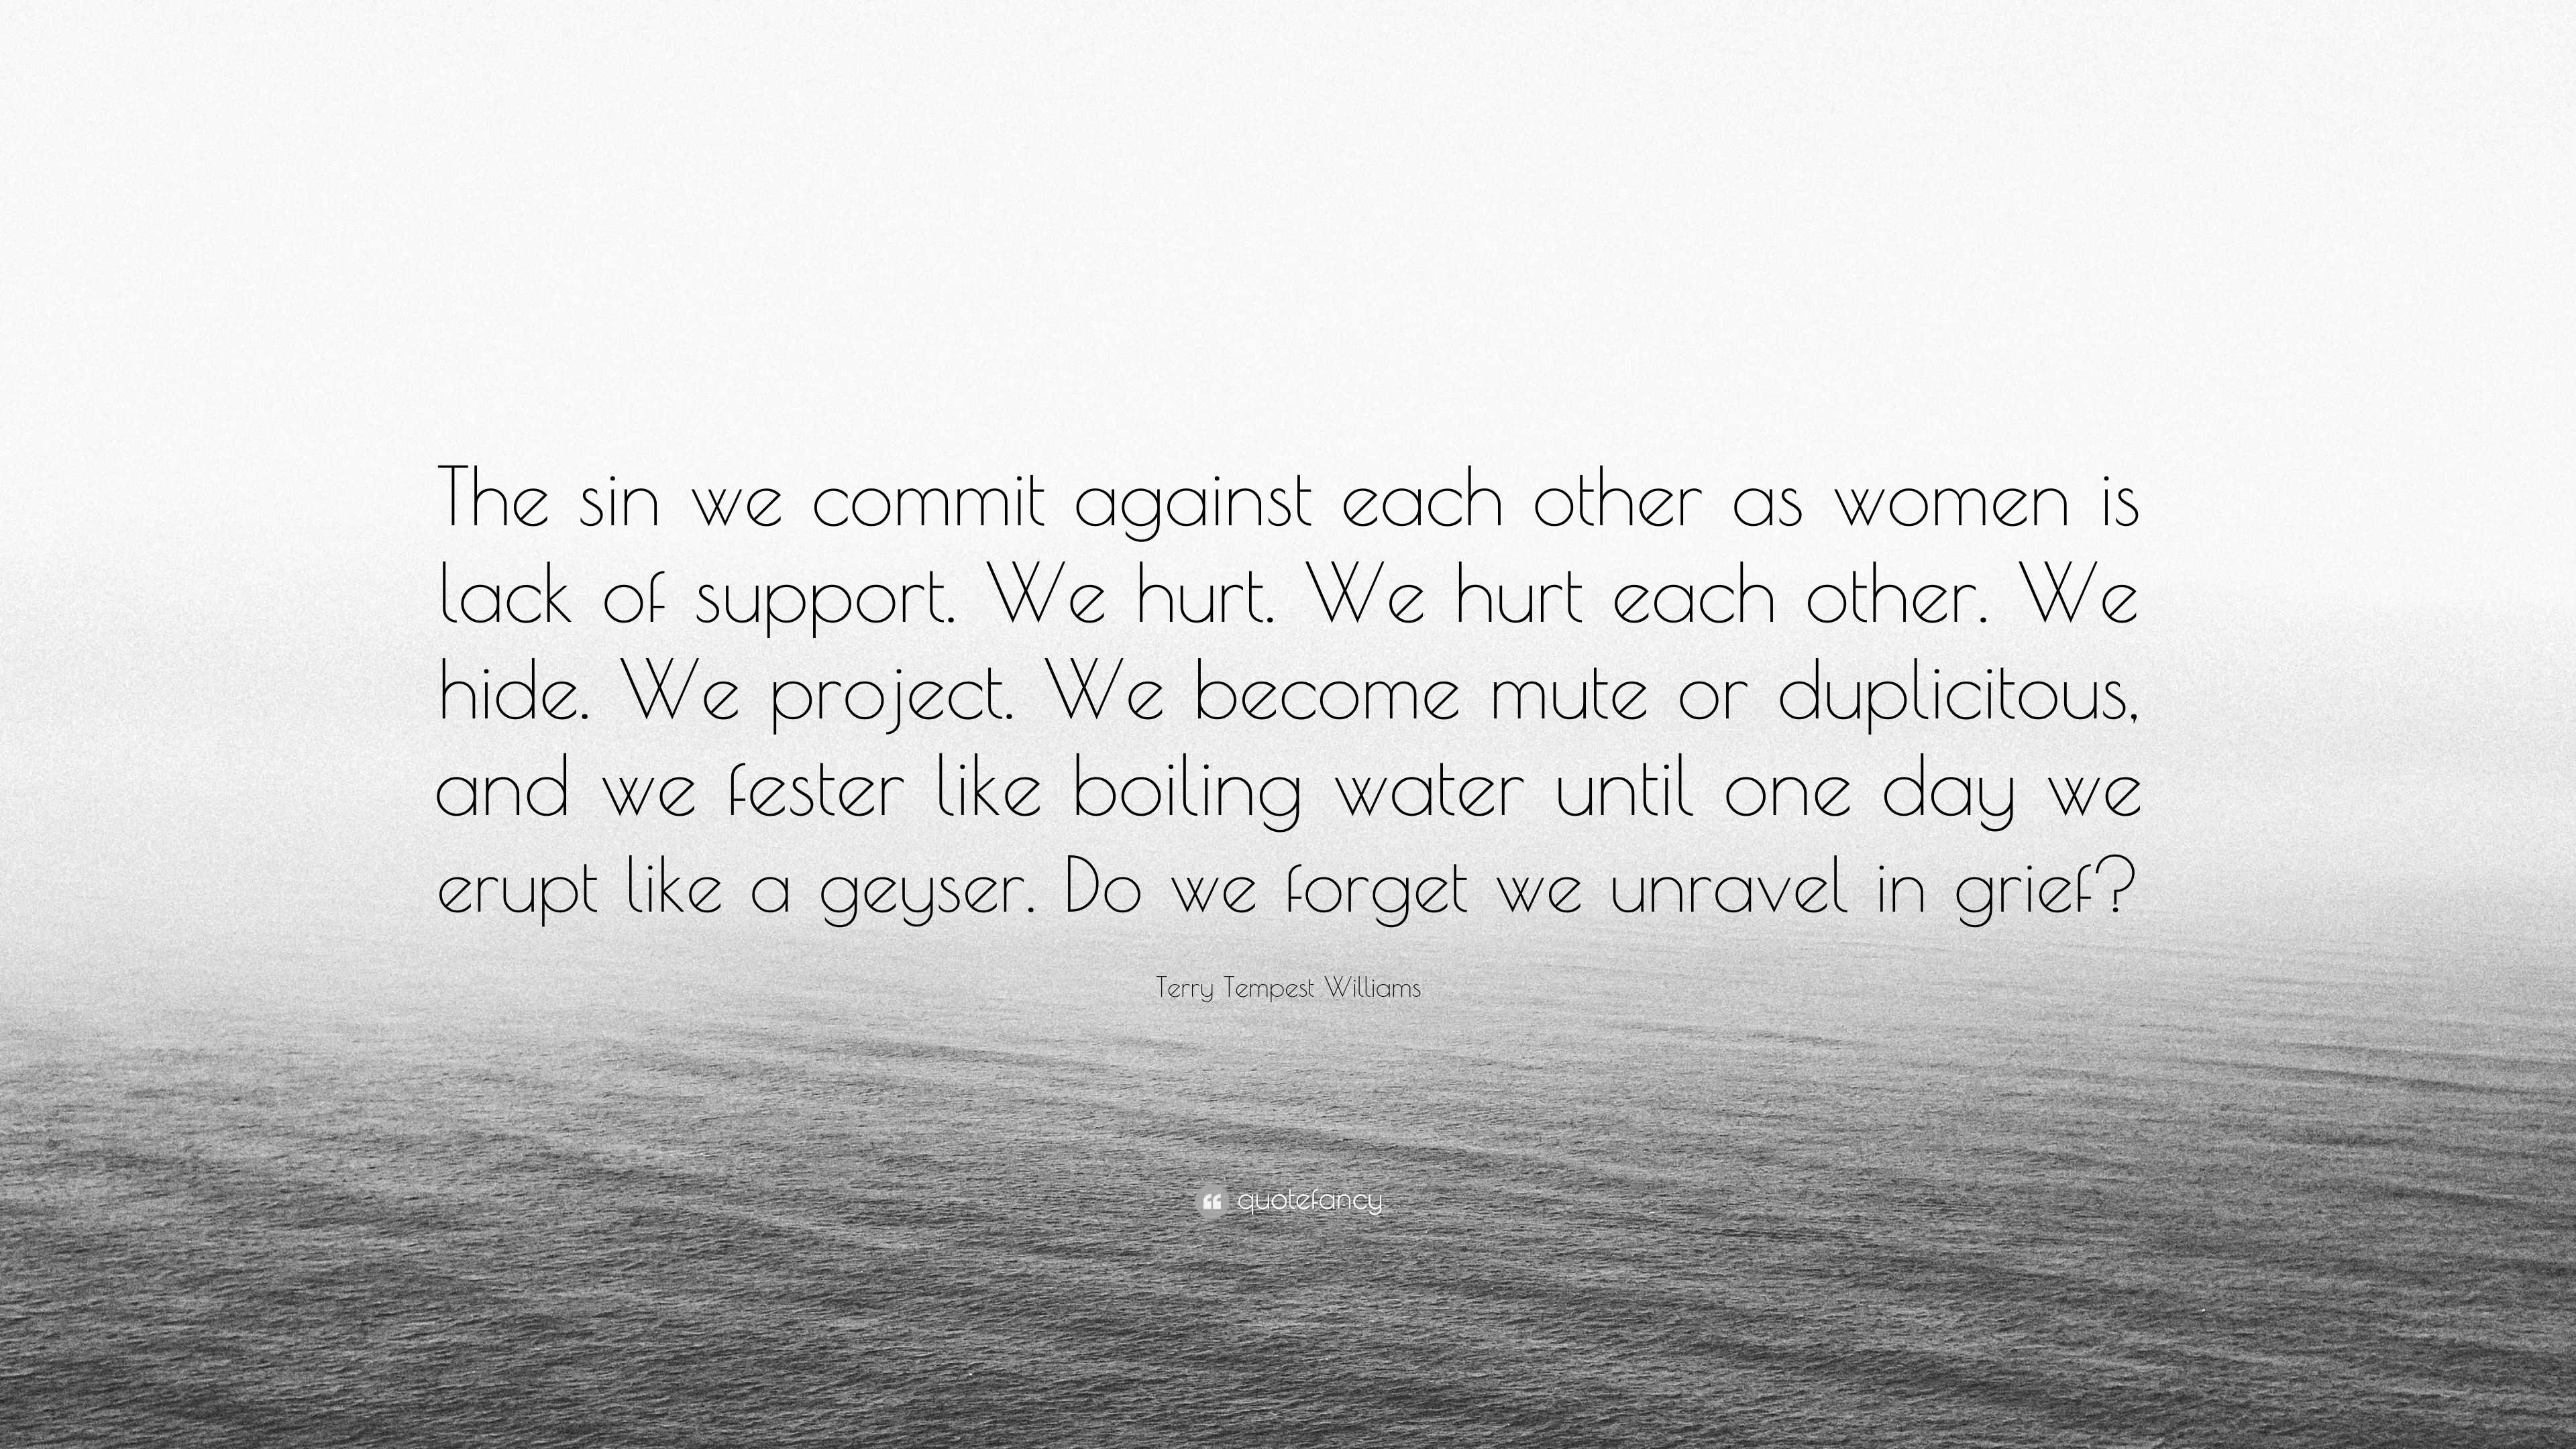 Terry Tempest Williams Quote: “The sin we commit against each other as women  is lack of support. We hurt. We hurt each other. We hide. We project. We  b...”